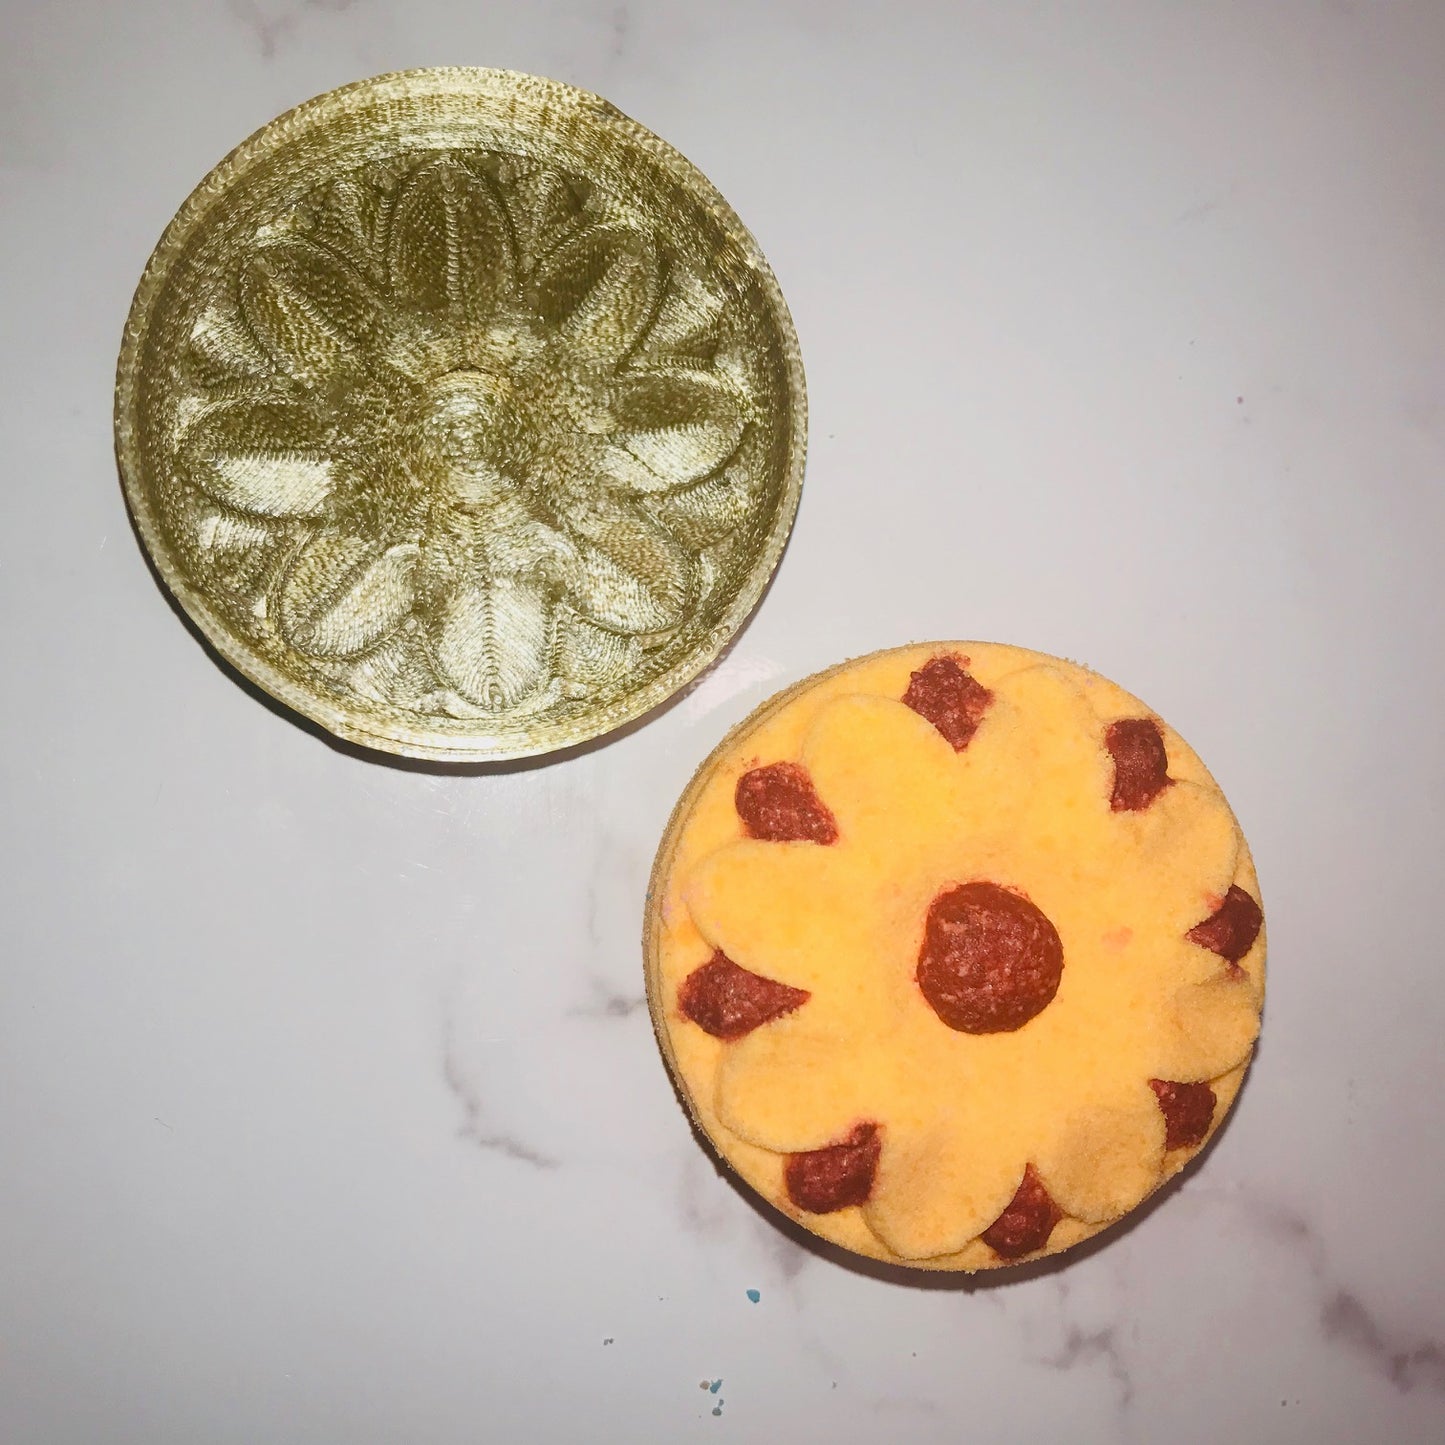 Tablet - Patterned Plates Bath Bomb Hand Mold